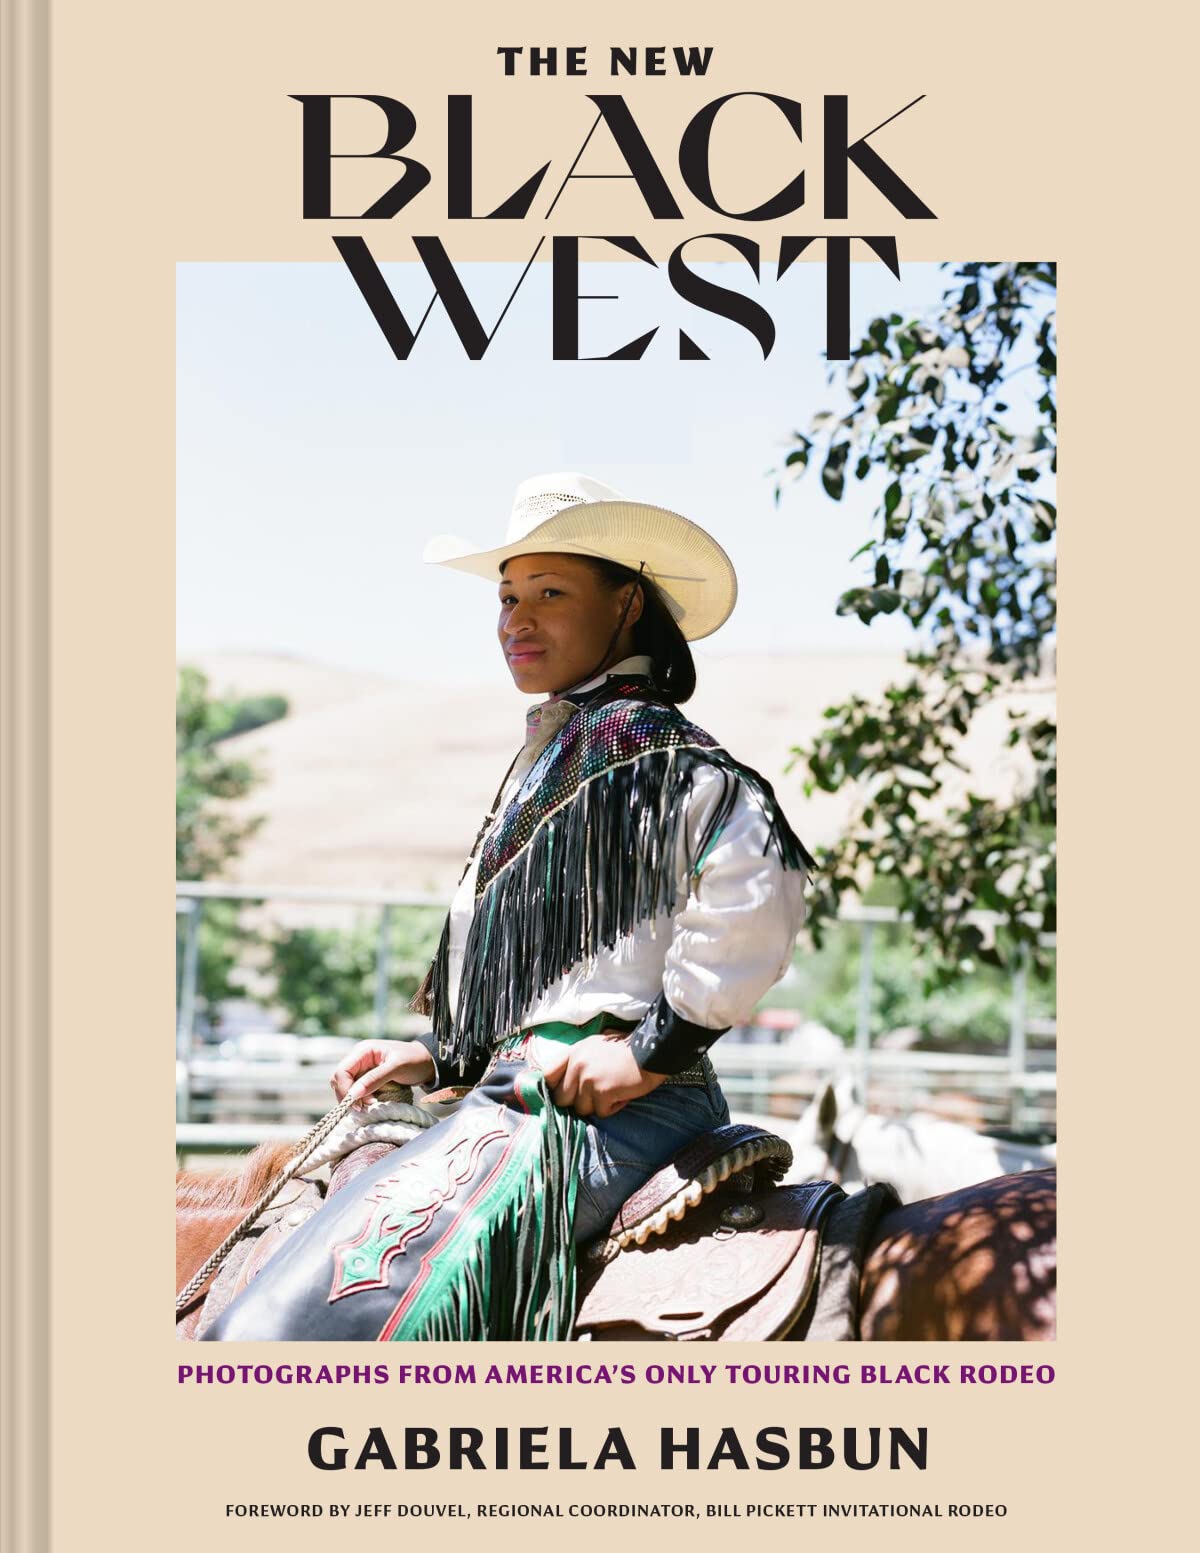 The New Black West- Photographs from America’s Only Touring Black Rodeo, Gabriela Hasbun